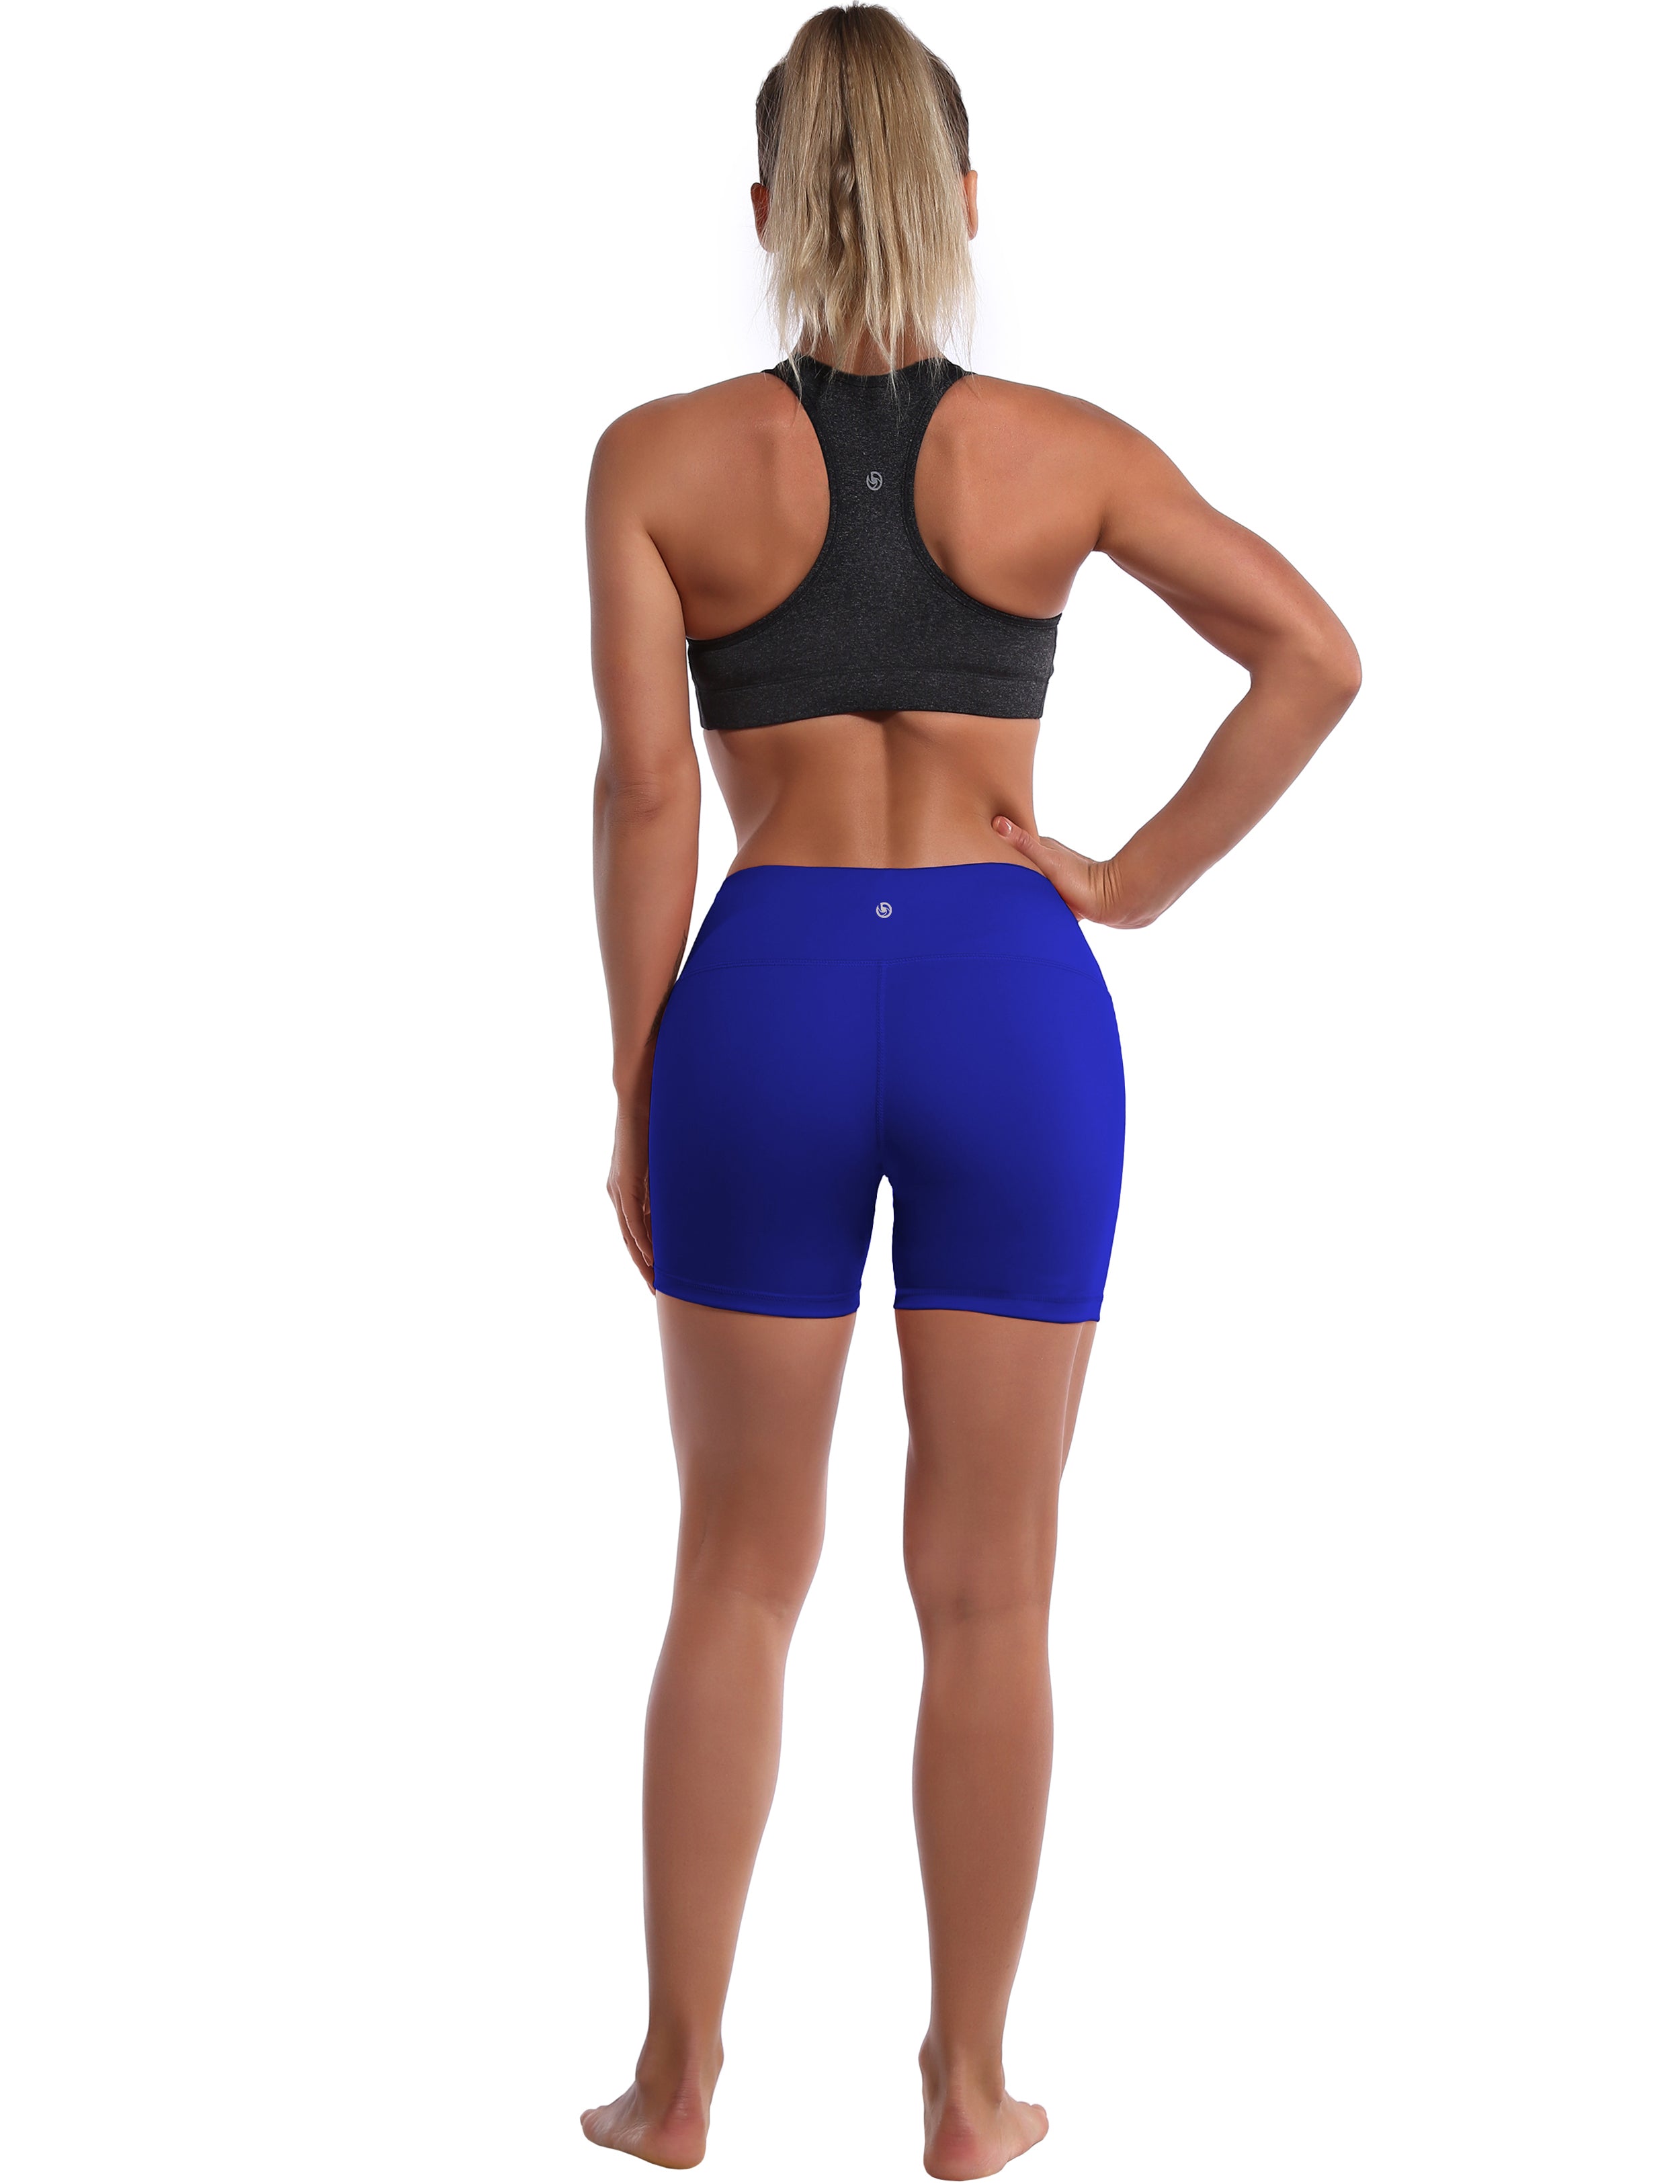 4" Tall Size Shorts navy Sleek, soft, smooth and totally comfortable: our newest style is here. Softest-ever fabric High elasticity High density 4-way stretch Fabric doesn't attract lint easily No see-through Moisture-wicking Machine wash 75% Nylon, 25% Spandex